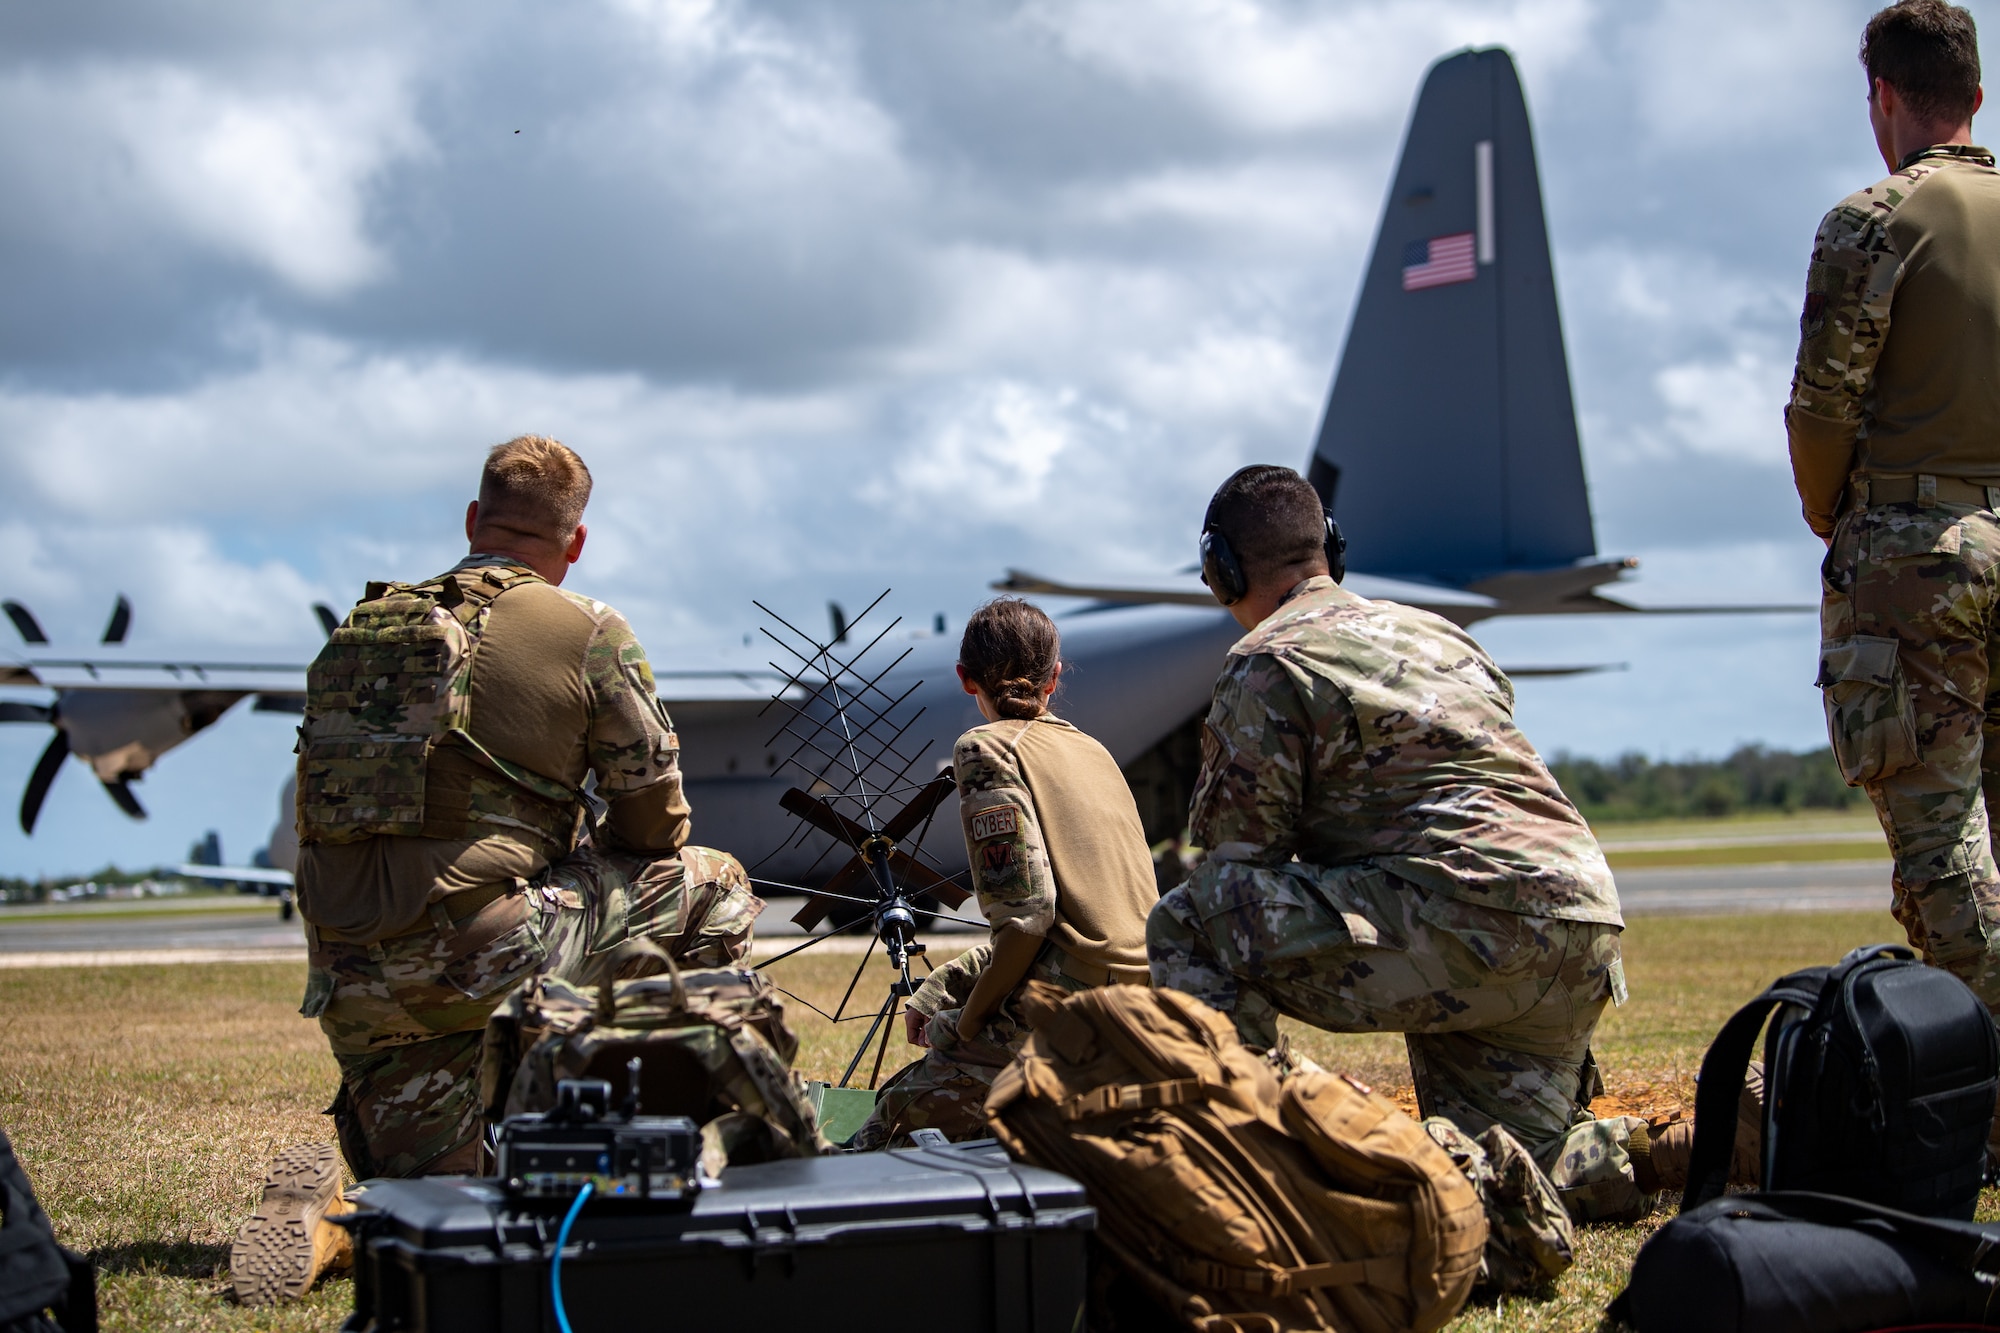 U.S. Air Force communications Airmen assigned to the 23rd Air Expeditionary Wing set up radio equipment during contingency location operations at the Rafael Hernández International Airport, Puerto Rico, Feb. 25, 2023. These forces were supporting Operation Forward Tiger, an Air Forces Southern exercise designed to increase combat readiness alongside humanitarian assistance and disaster response capabilities with U.S. partners and allies throughout the Caribbean. (U.S. Air Force photo by Airman 1st Class Courtney Sebastianelli)